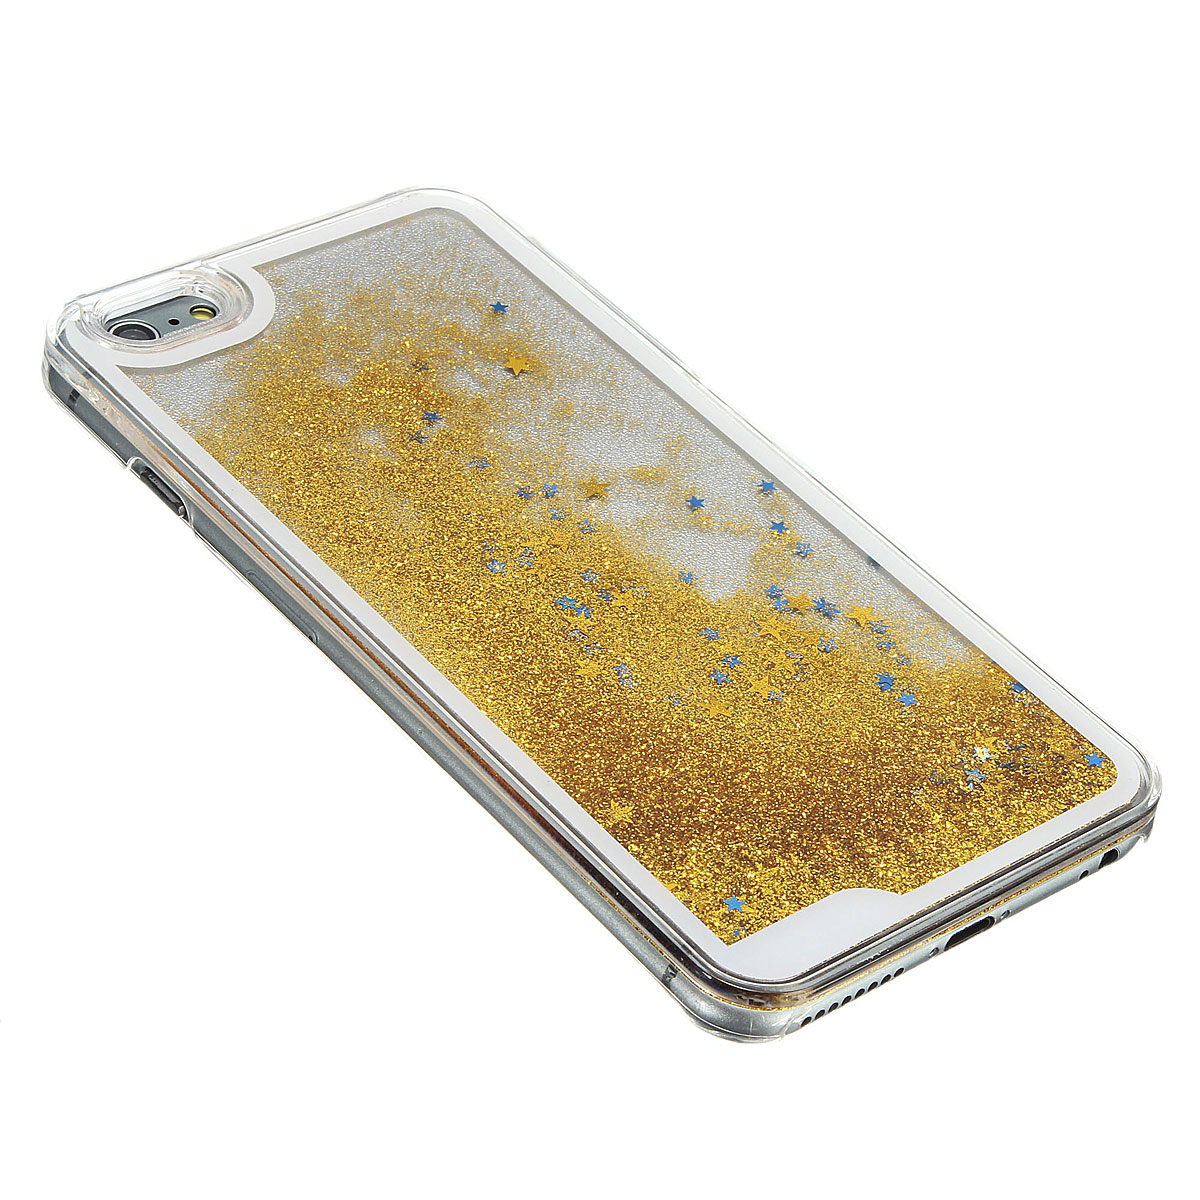 Glitter Bling Stars Colourful Clear Liquid Case Cover For Apple Iphone Se 5 5s 6 6s Plus, Yellow